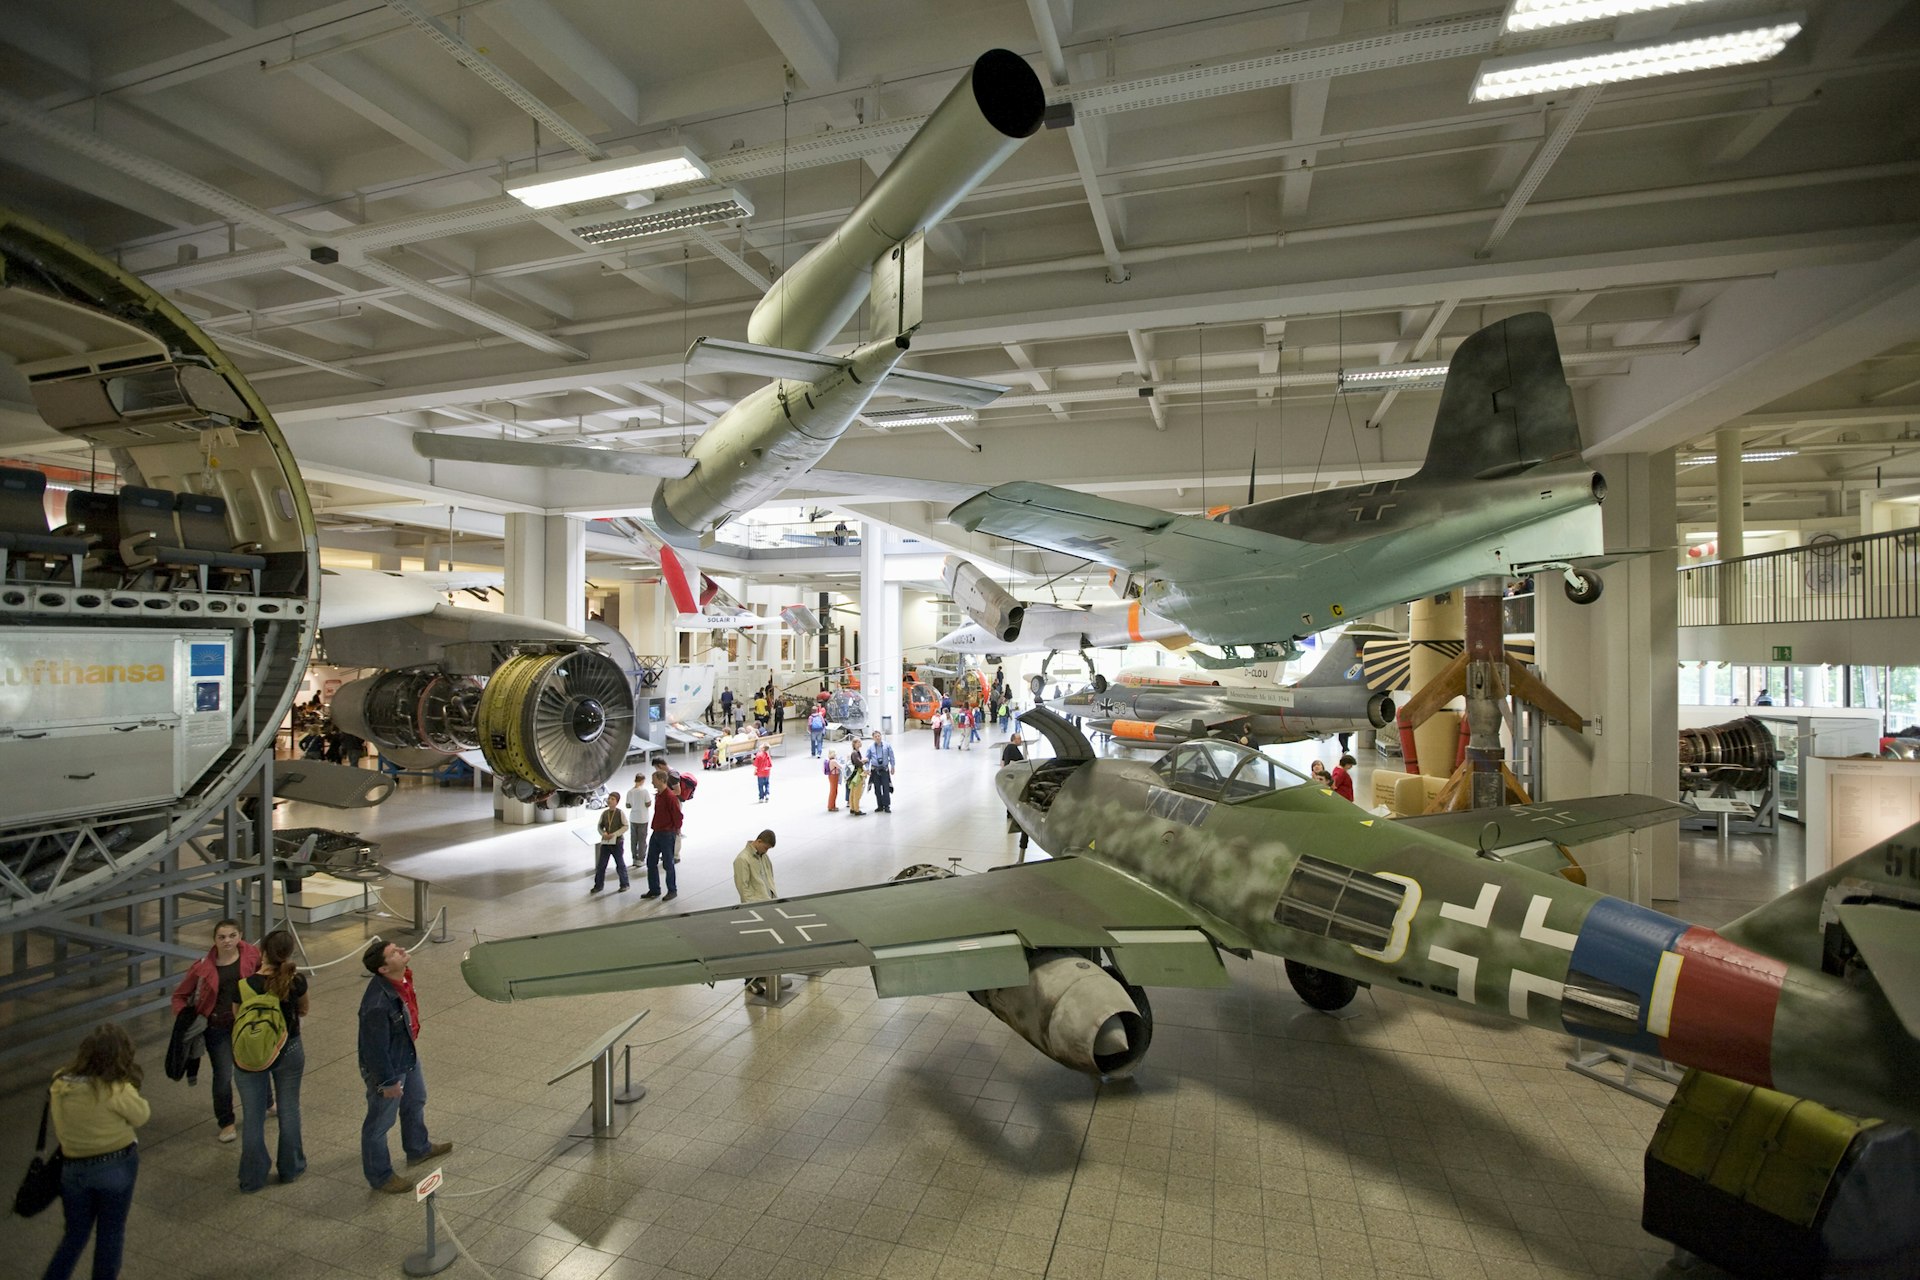 A shot taken from above looking down into a massive museum room furnished with airplanes and other vehicles. People are moving around between the exhibits